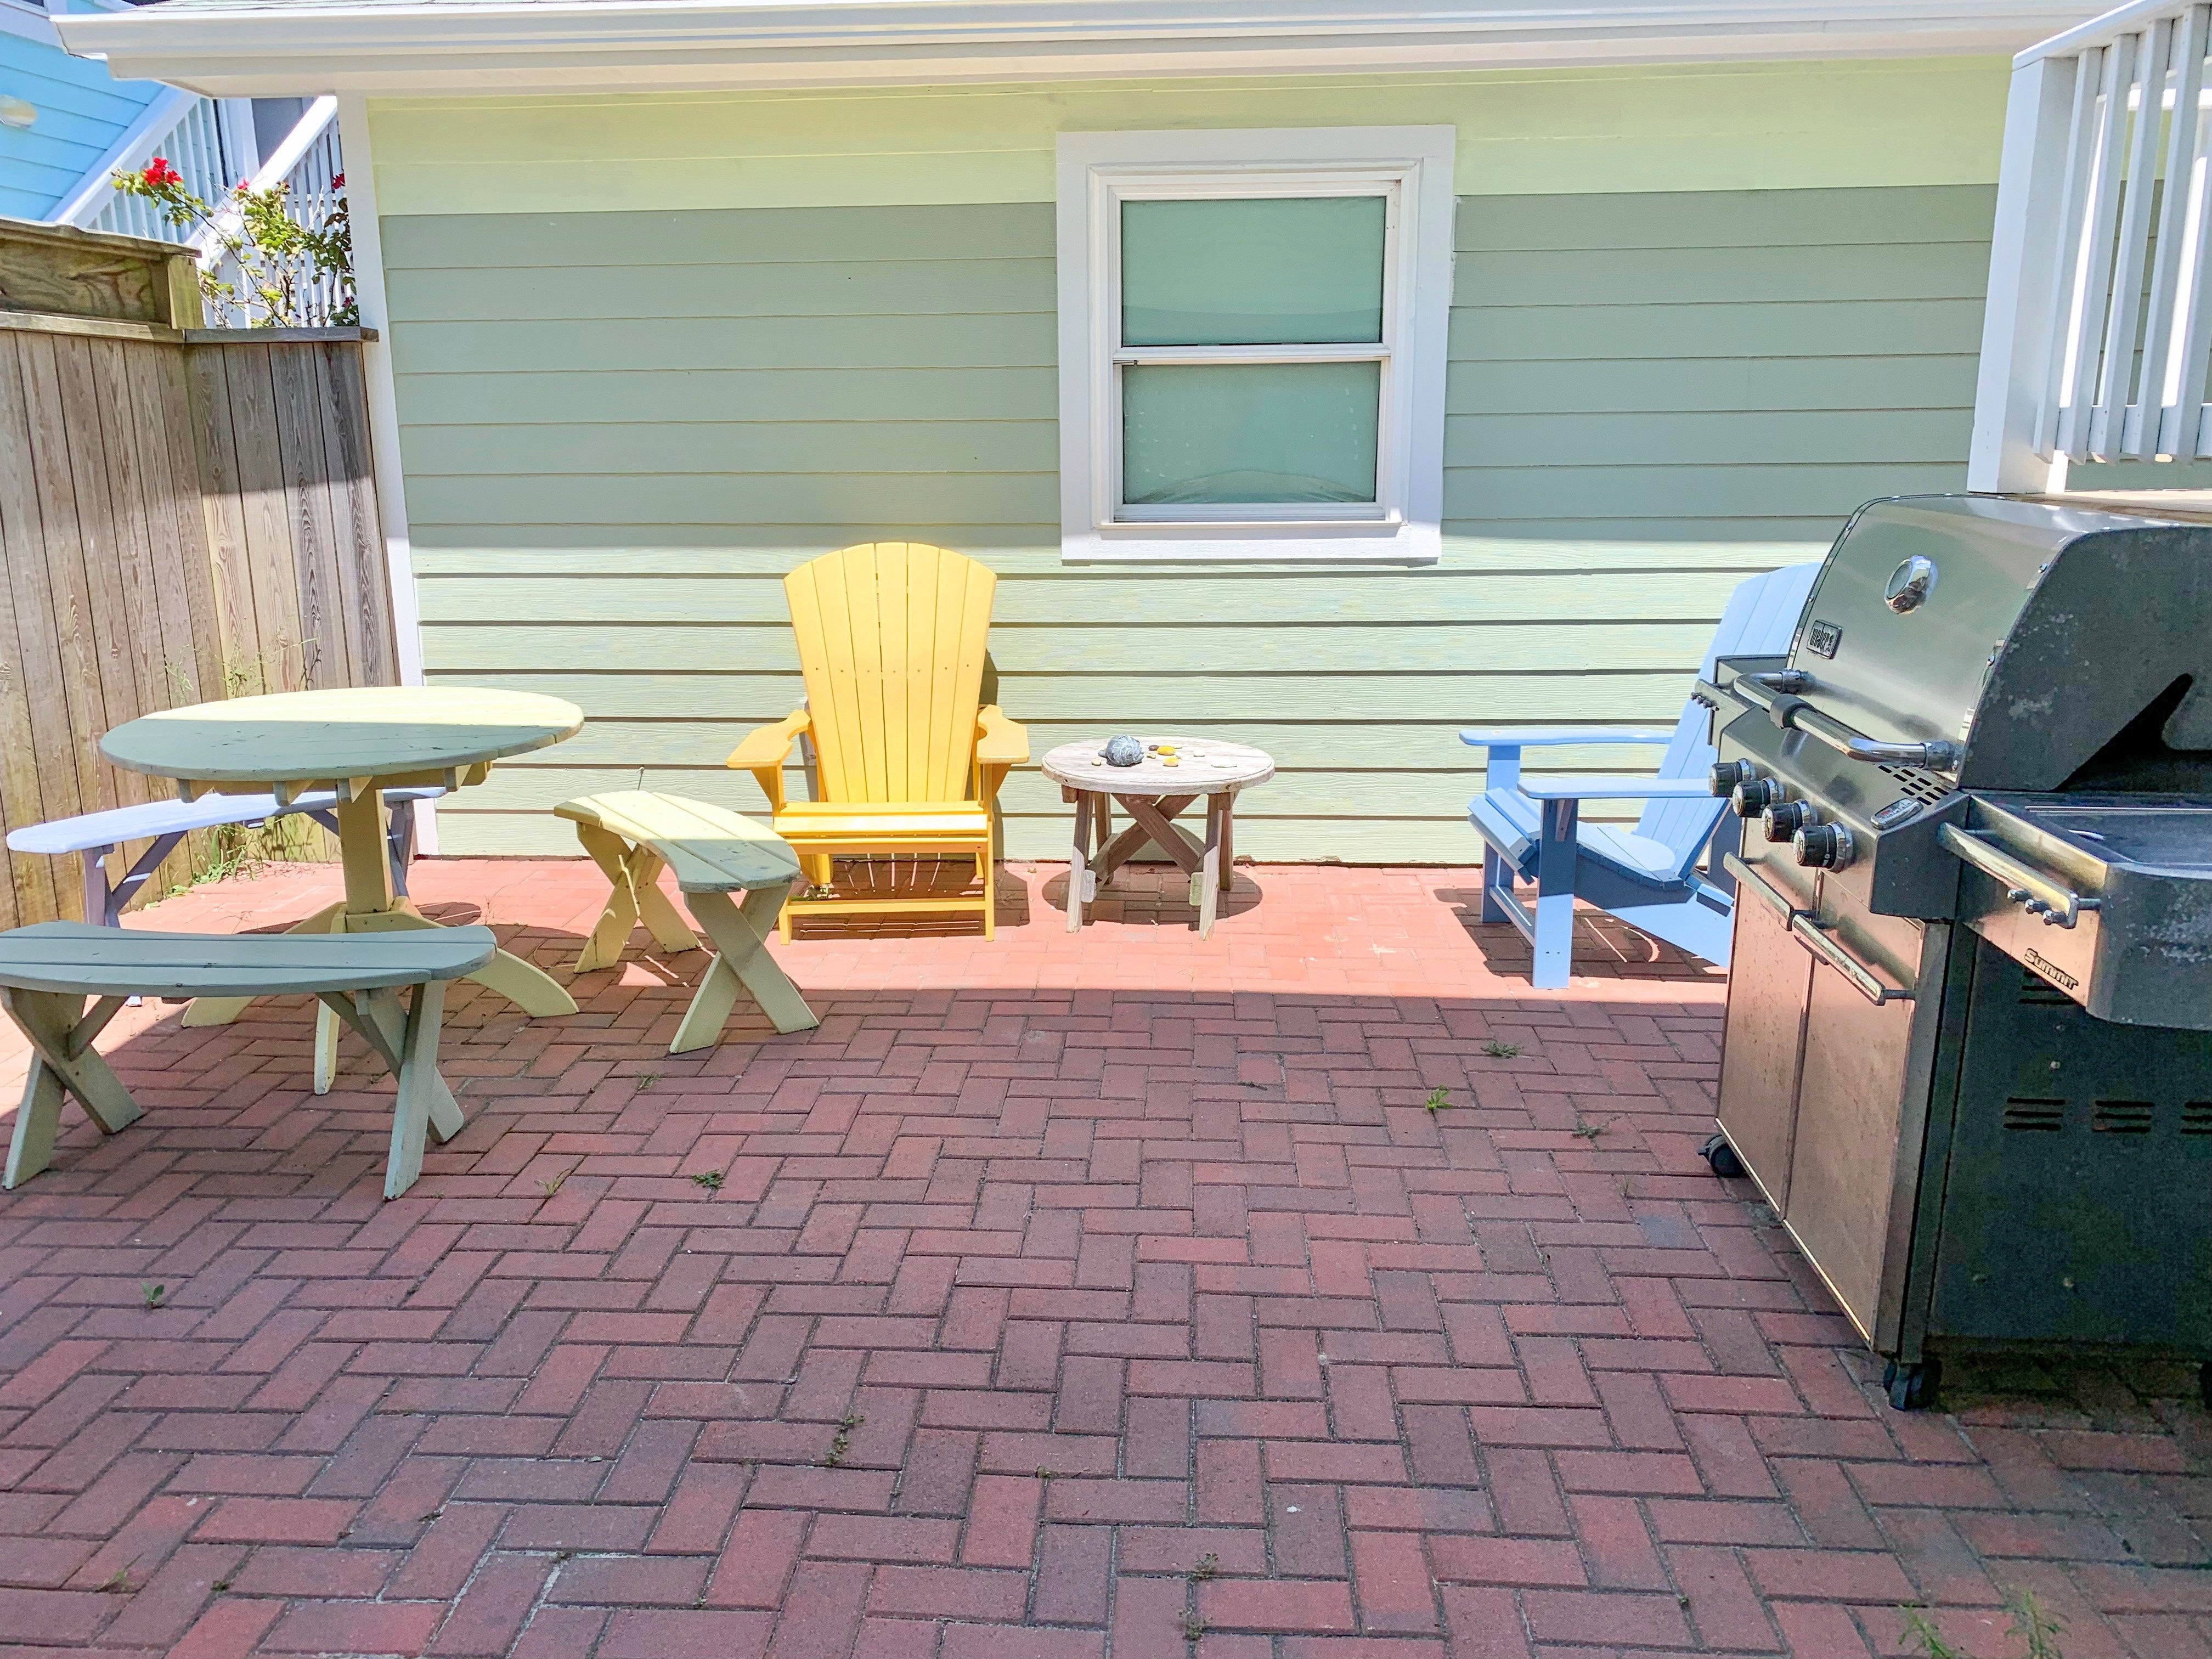 Gas Grill and Sitting Area